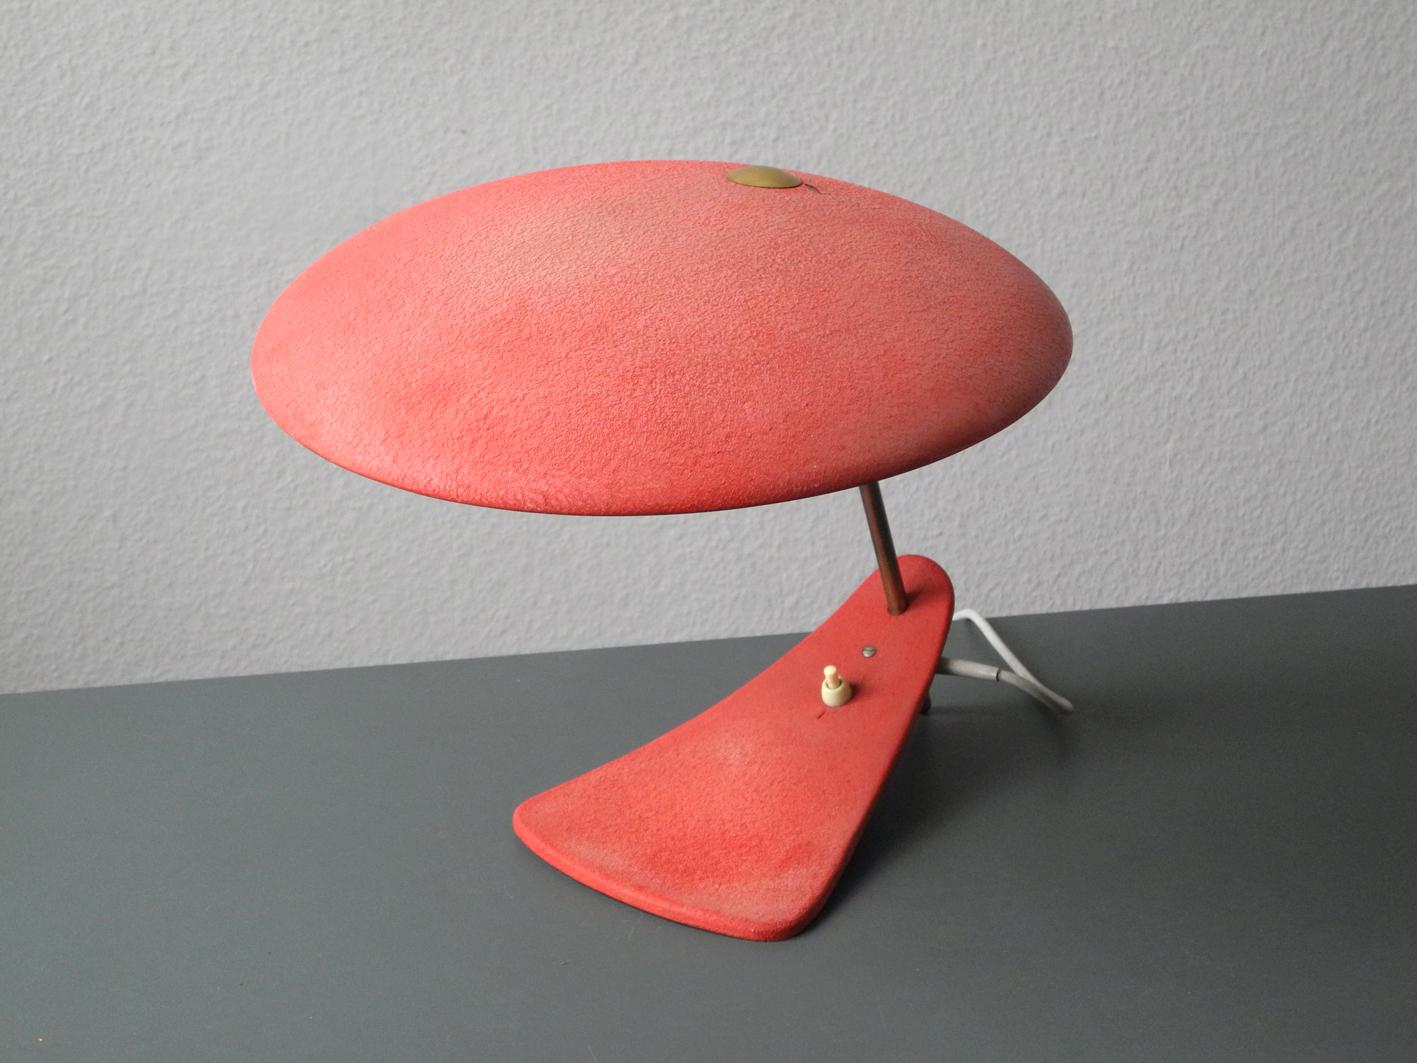 Very rare Italian Mid-Century Modernist table lamp in red shrink paint.
A gorgeous minimalistic design from the 1950s.
Big round screen with rare cast iron beak shaped base.
Fully functional with one E27 socket.
Great condition with great